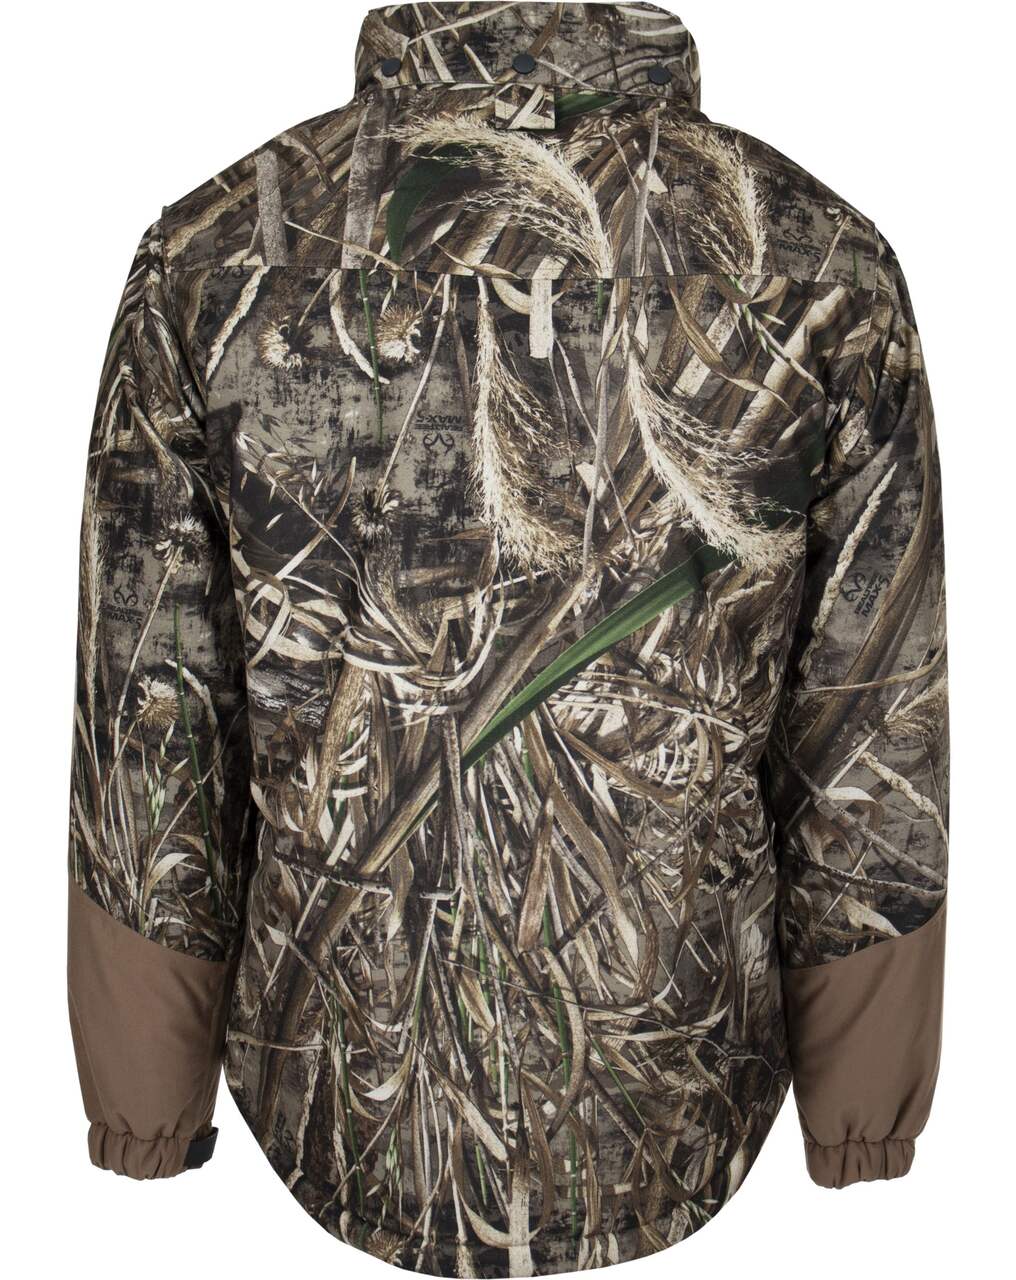 Yukon Gear Men's Fleece Hoodie with Front Pouch Pockets for Storage,  Realtree MAX 5 Camo